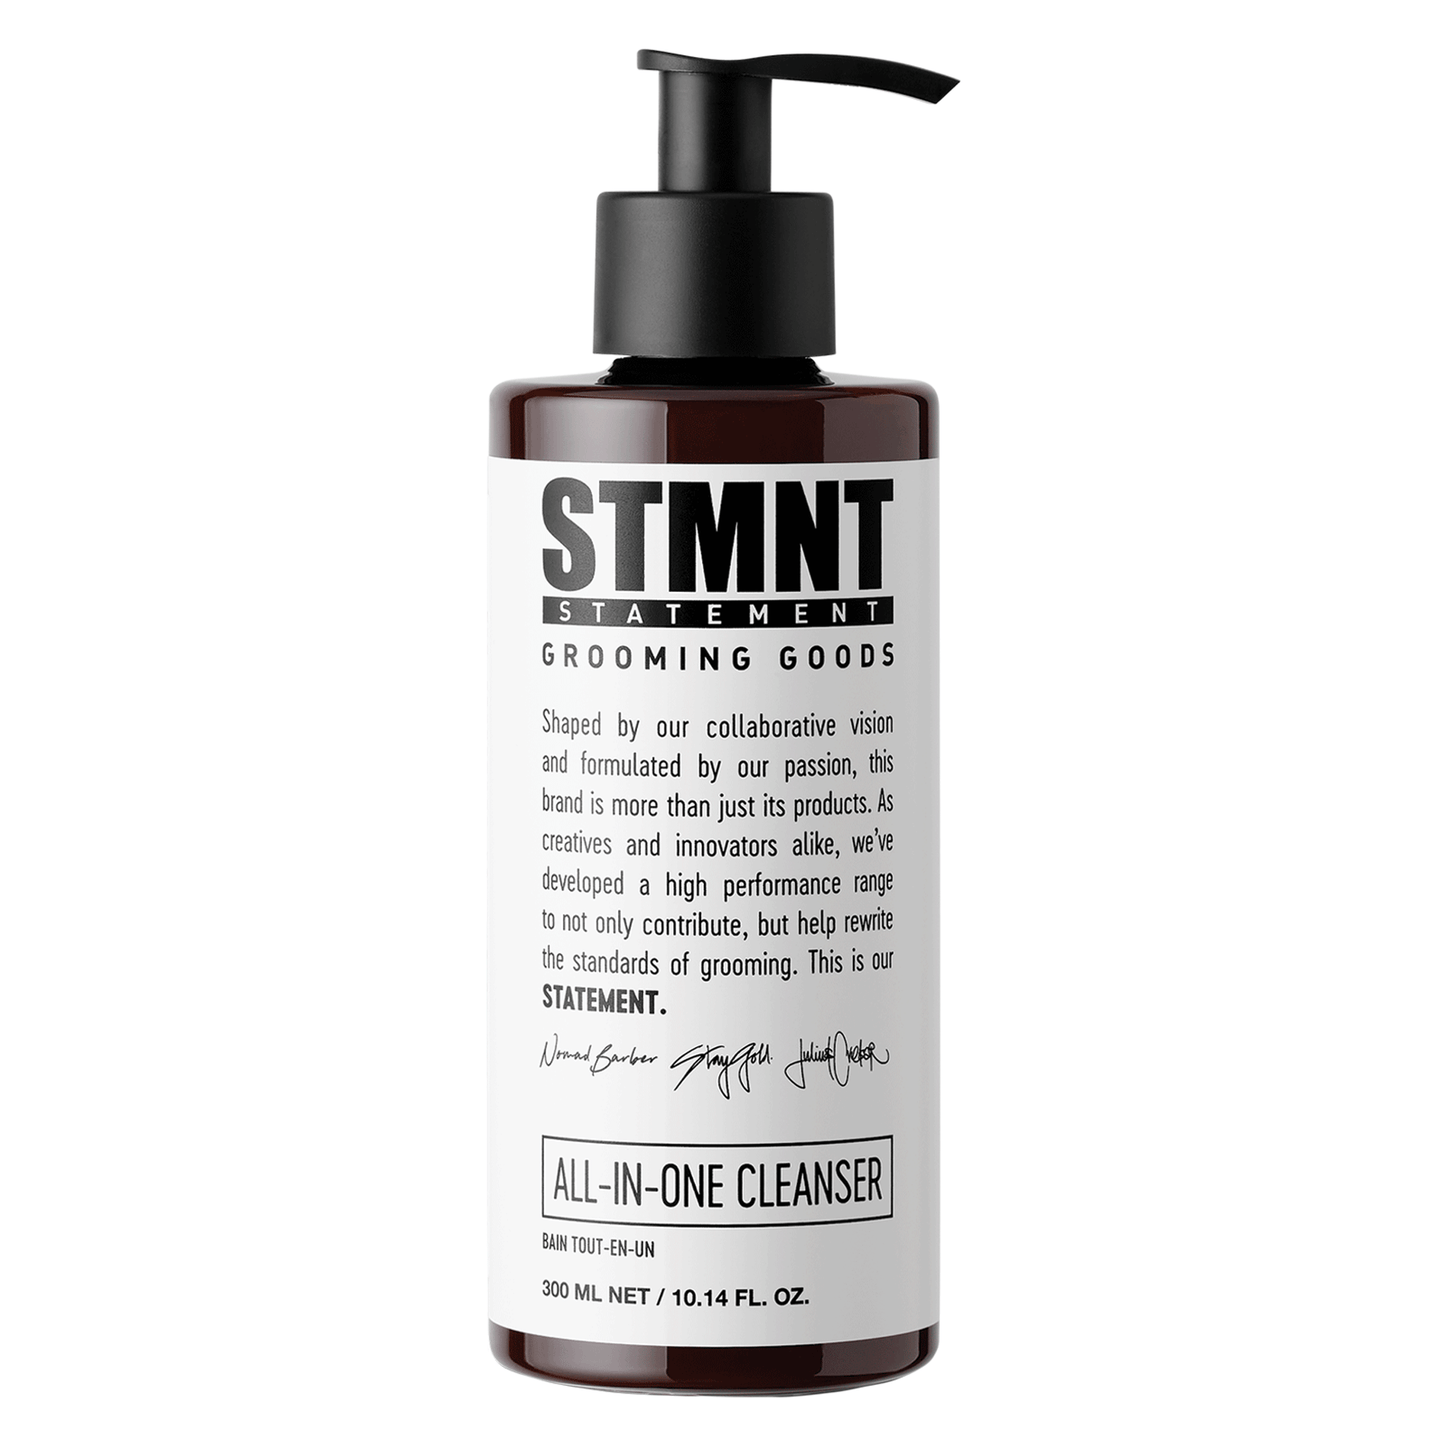 STMNT Statement Grooming Goods All-In-One Cleanser - 10.14oz